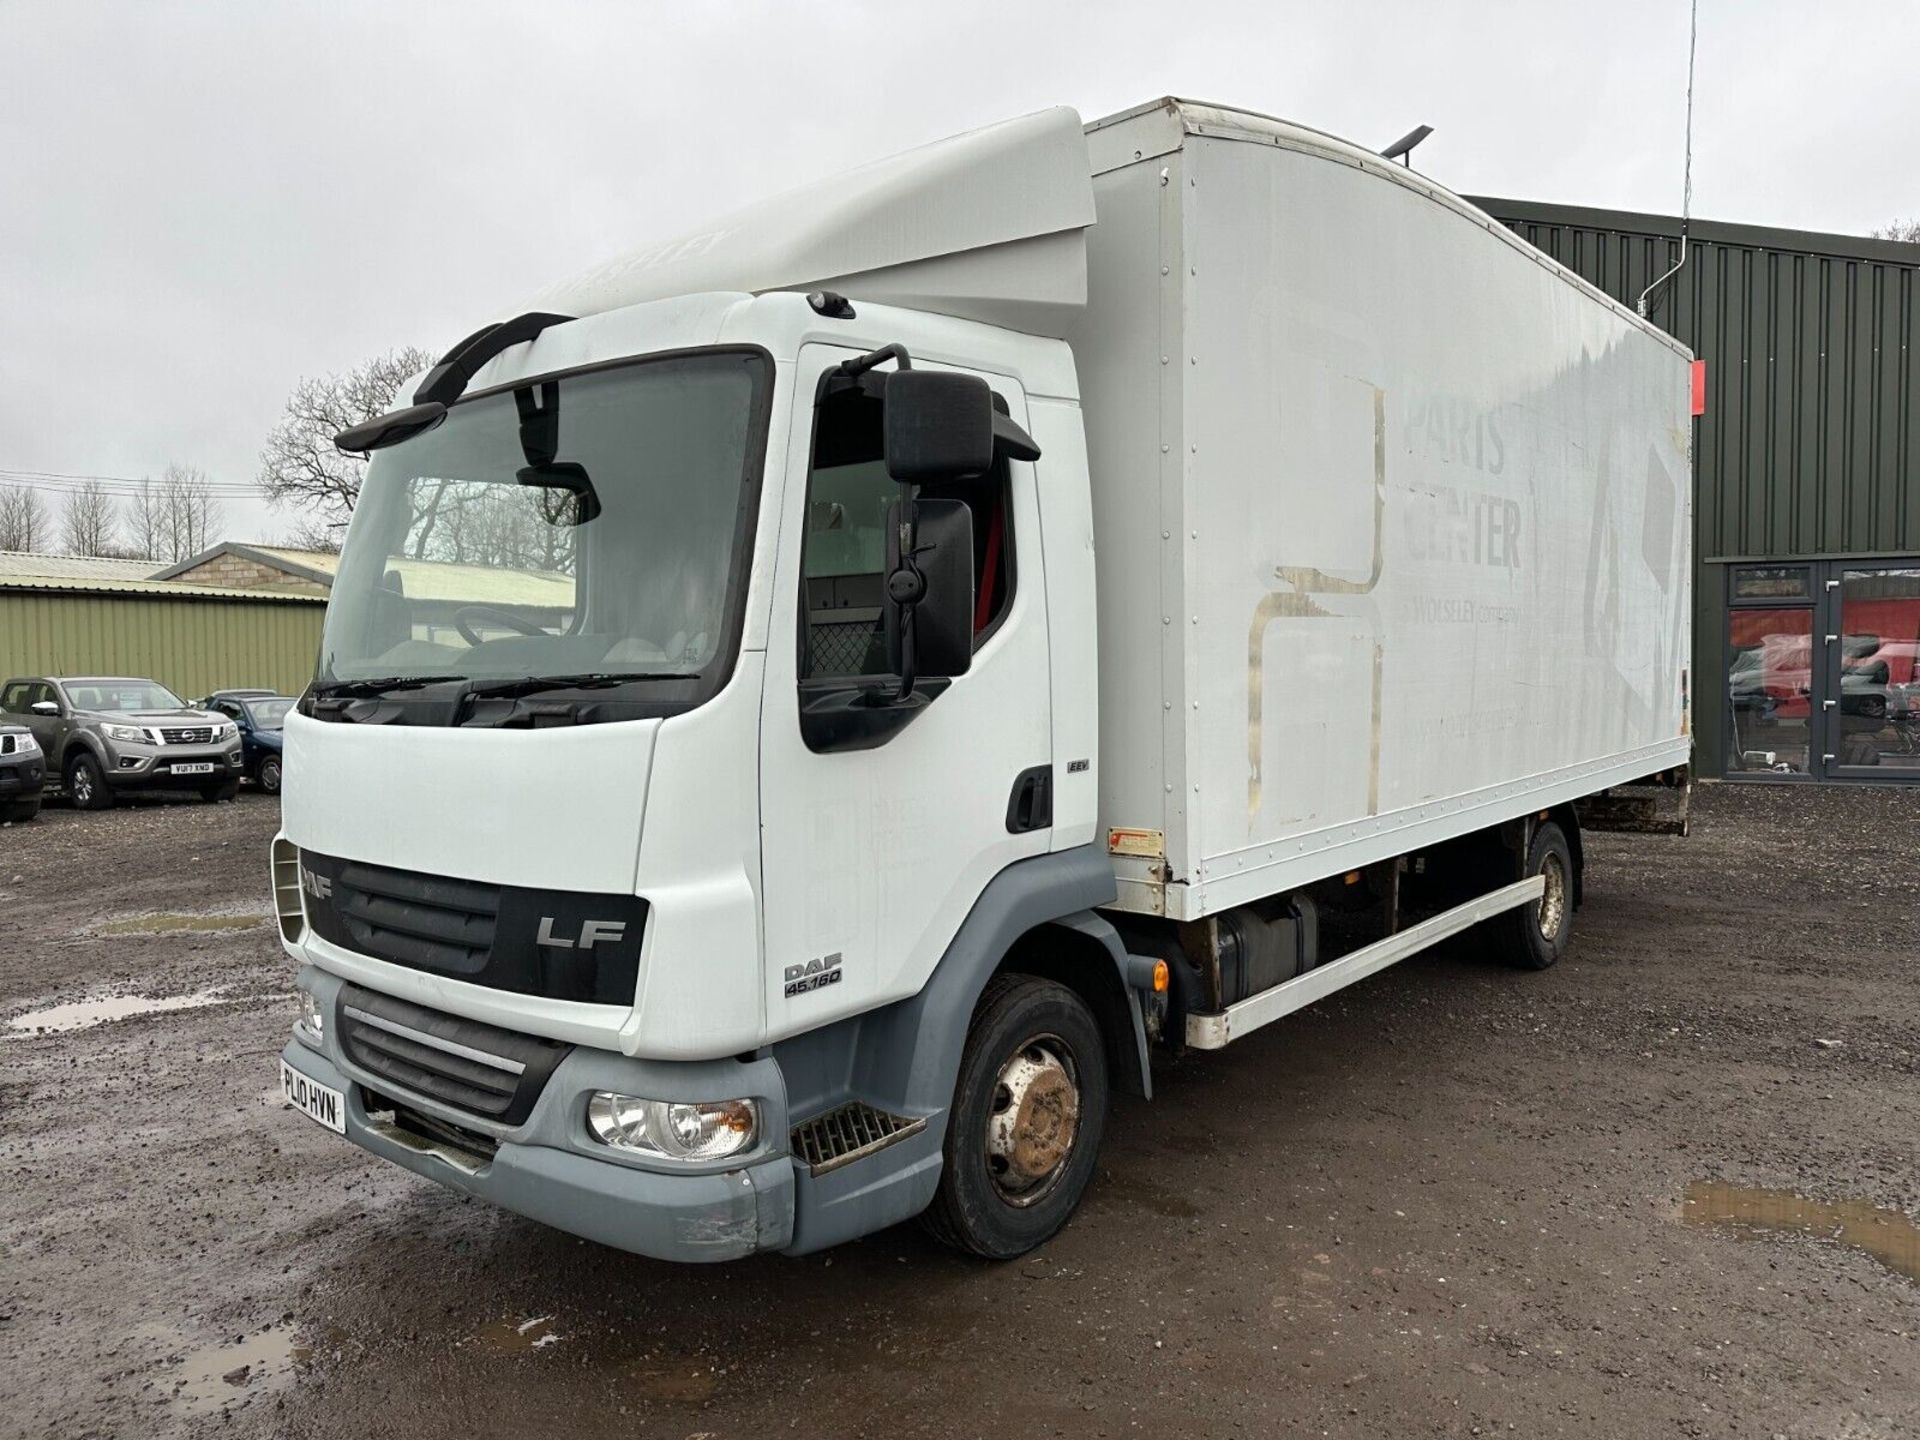 RELIABLE WORKHORSE: 2010 LF DAF TRUCK 7.5T - READY FOR EXPORT >>--NO VAT ON HAMMER--<< - Image 2 of 20